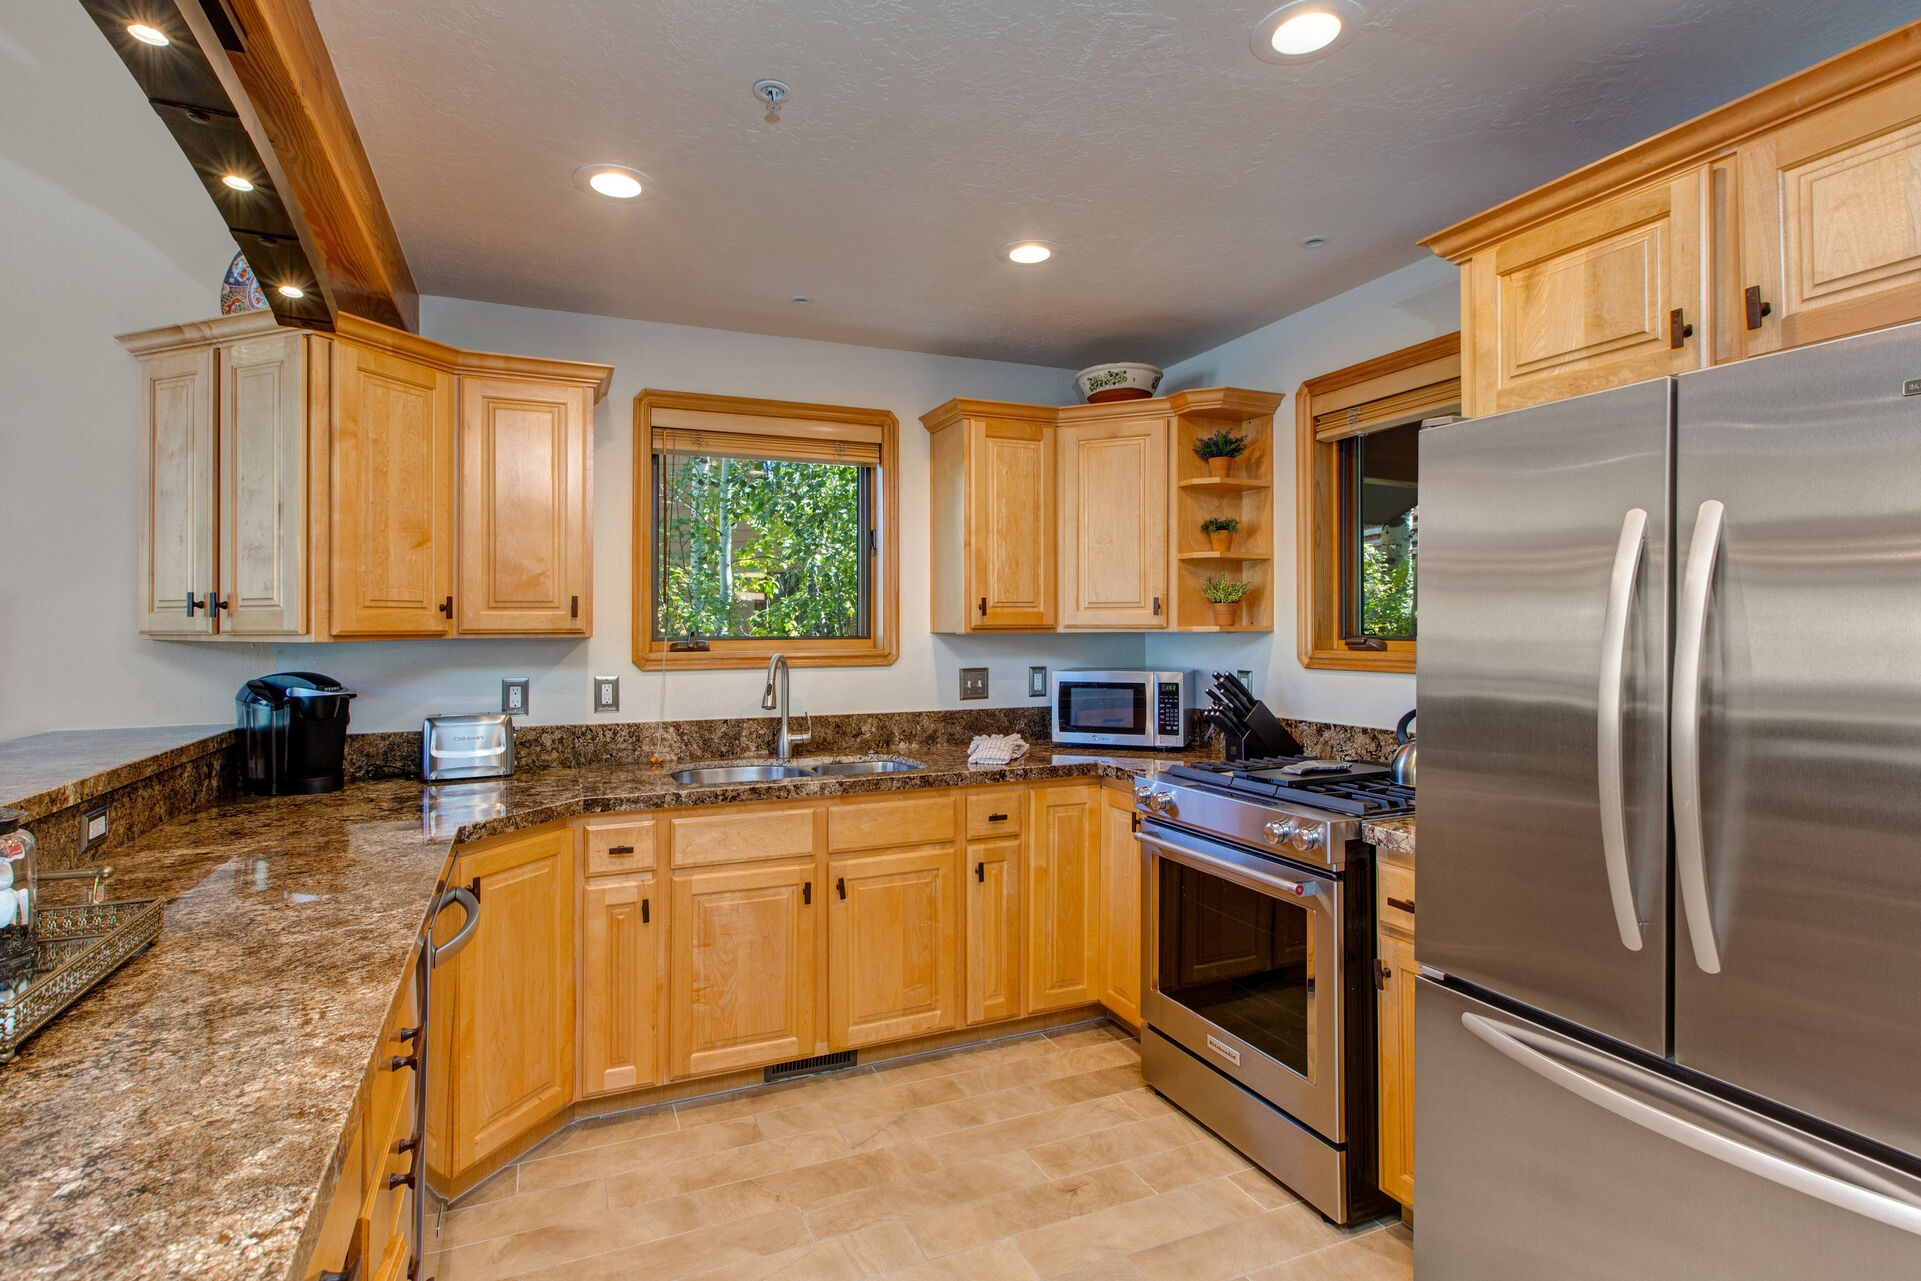 Fully Equipped Kitchen with Gorgeous Granite Countertops, New Stainless Steel Appliances, Including a Gas Range